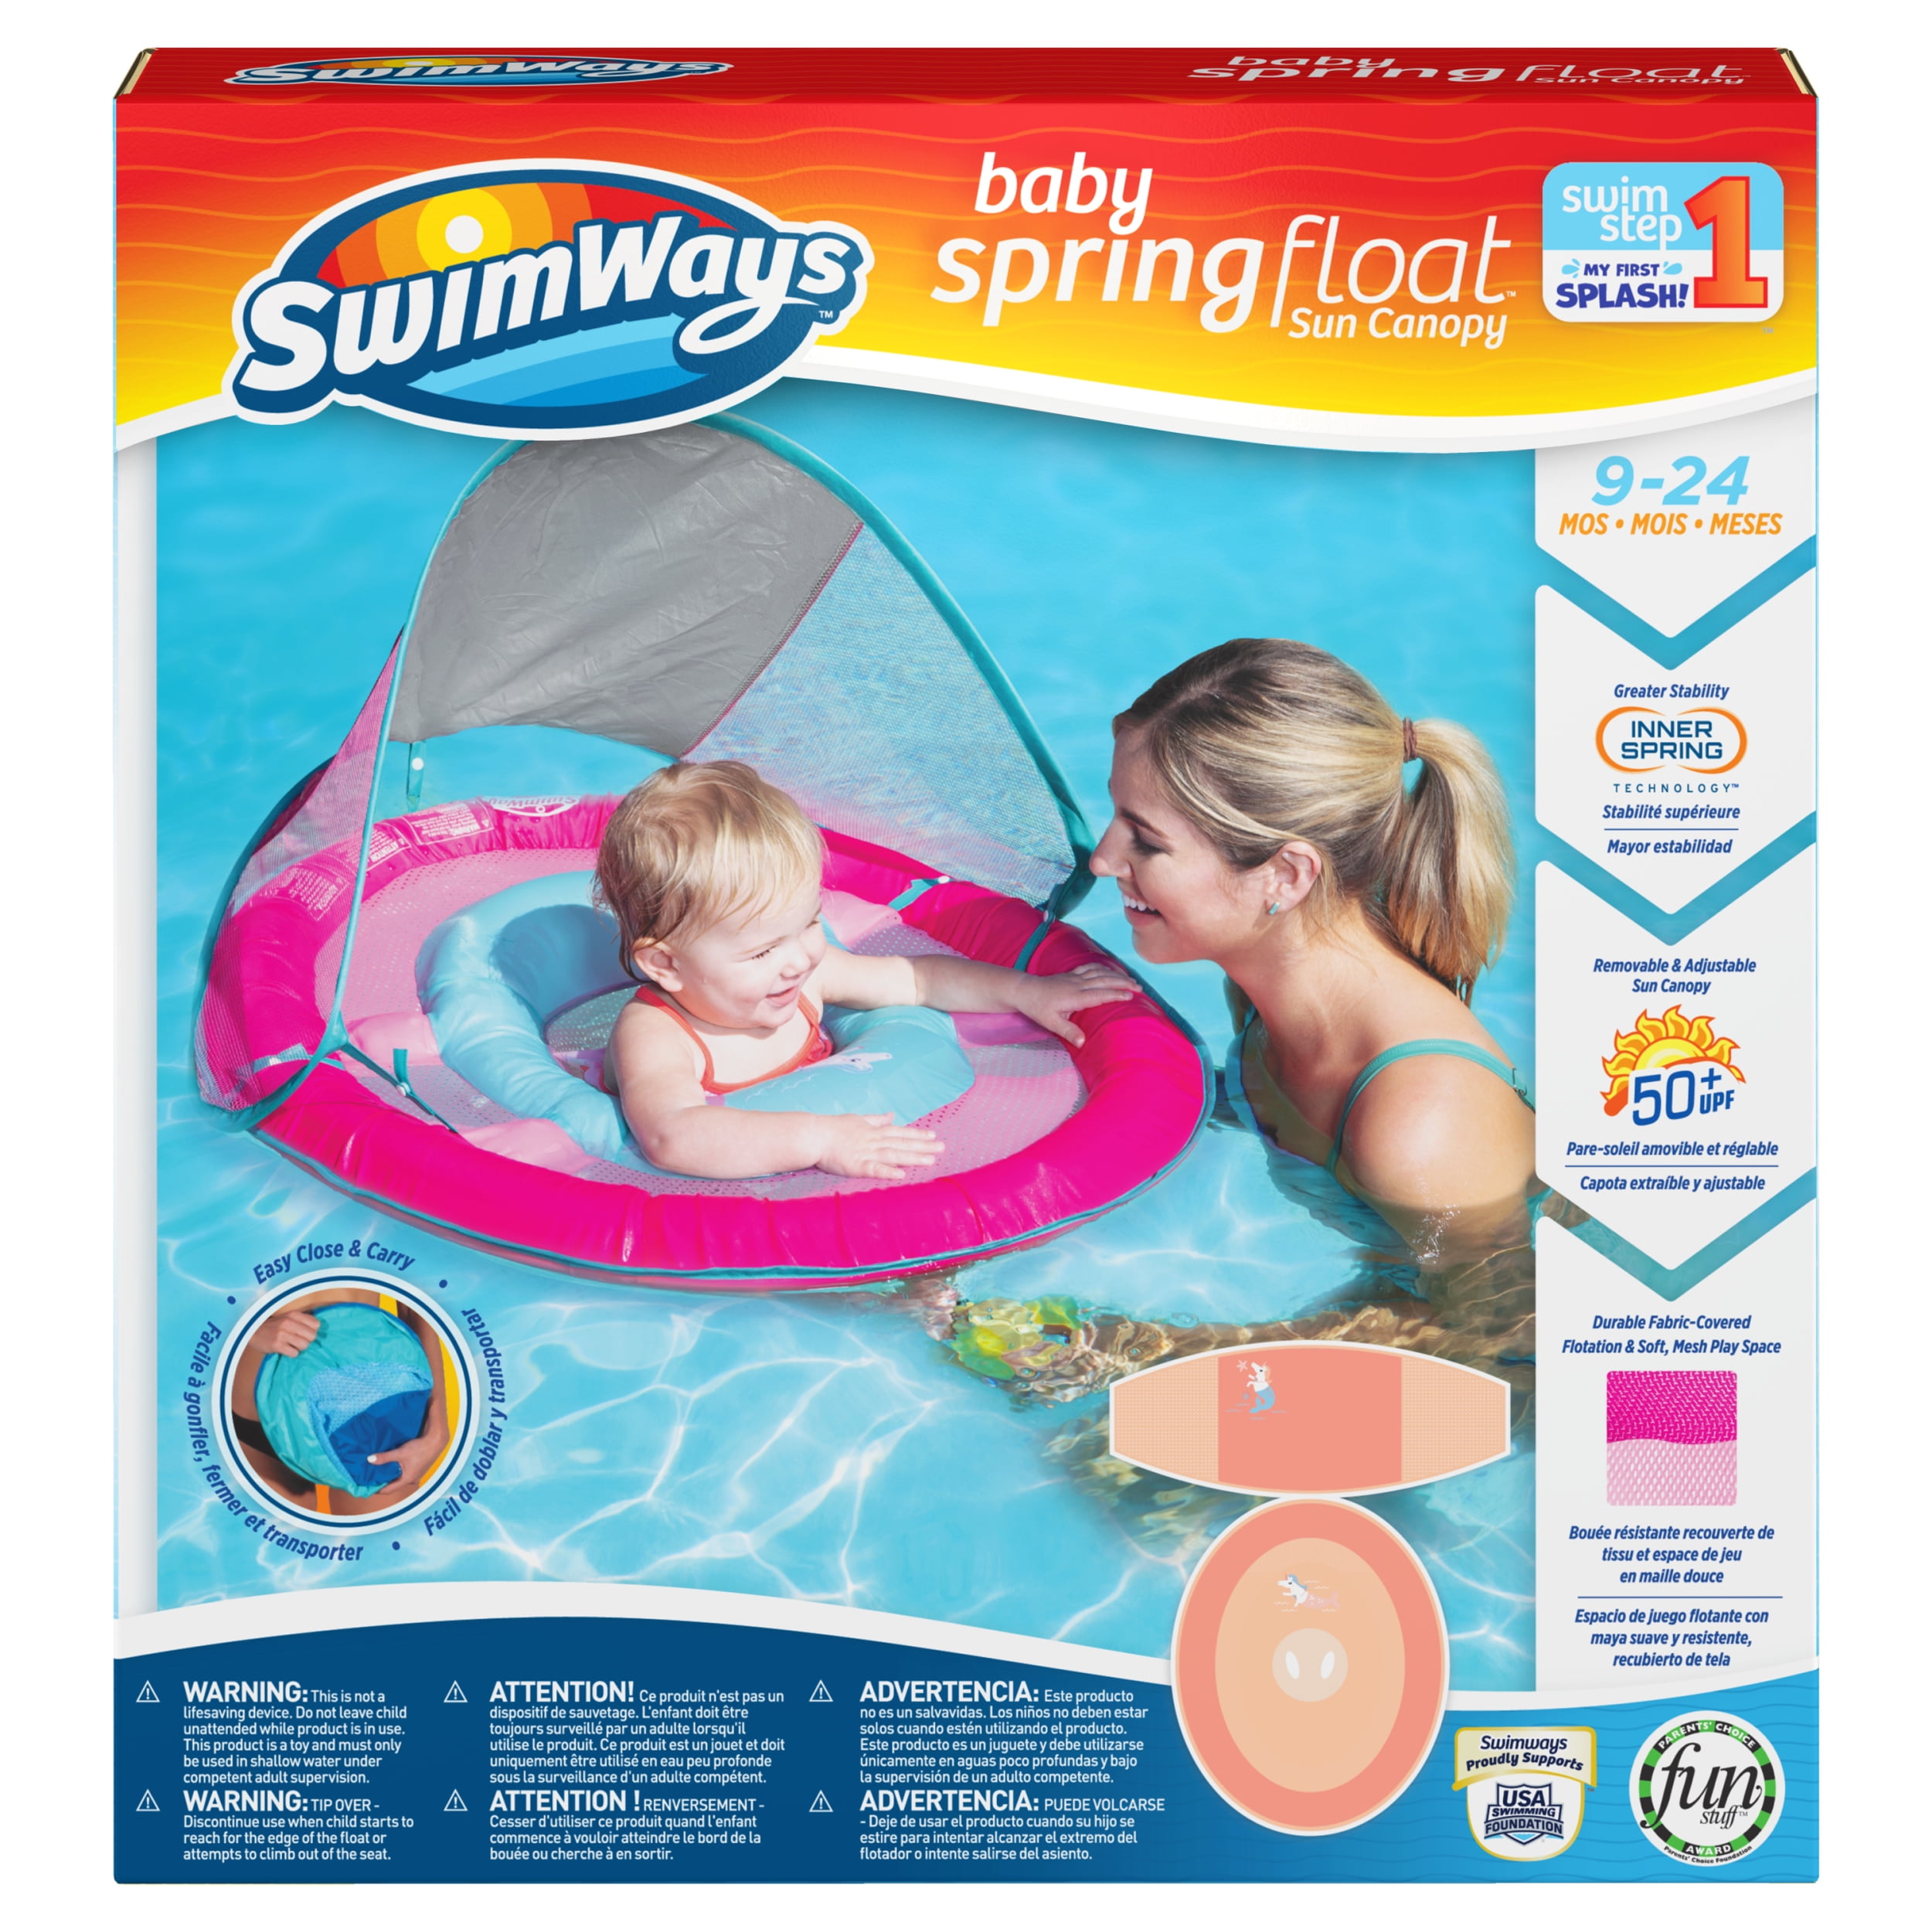 Orange Details about   SwimWays Baby Spring Float Sun Canopy Swim Step 1 for 9-24 Months UPF 50 